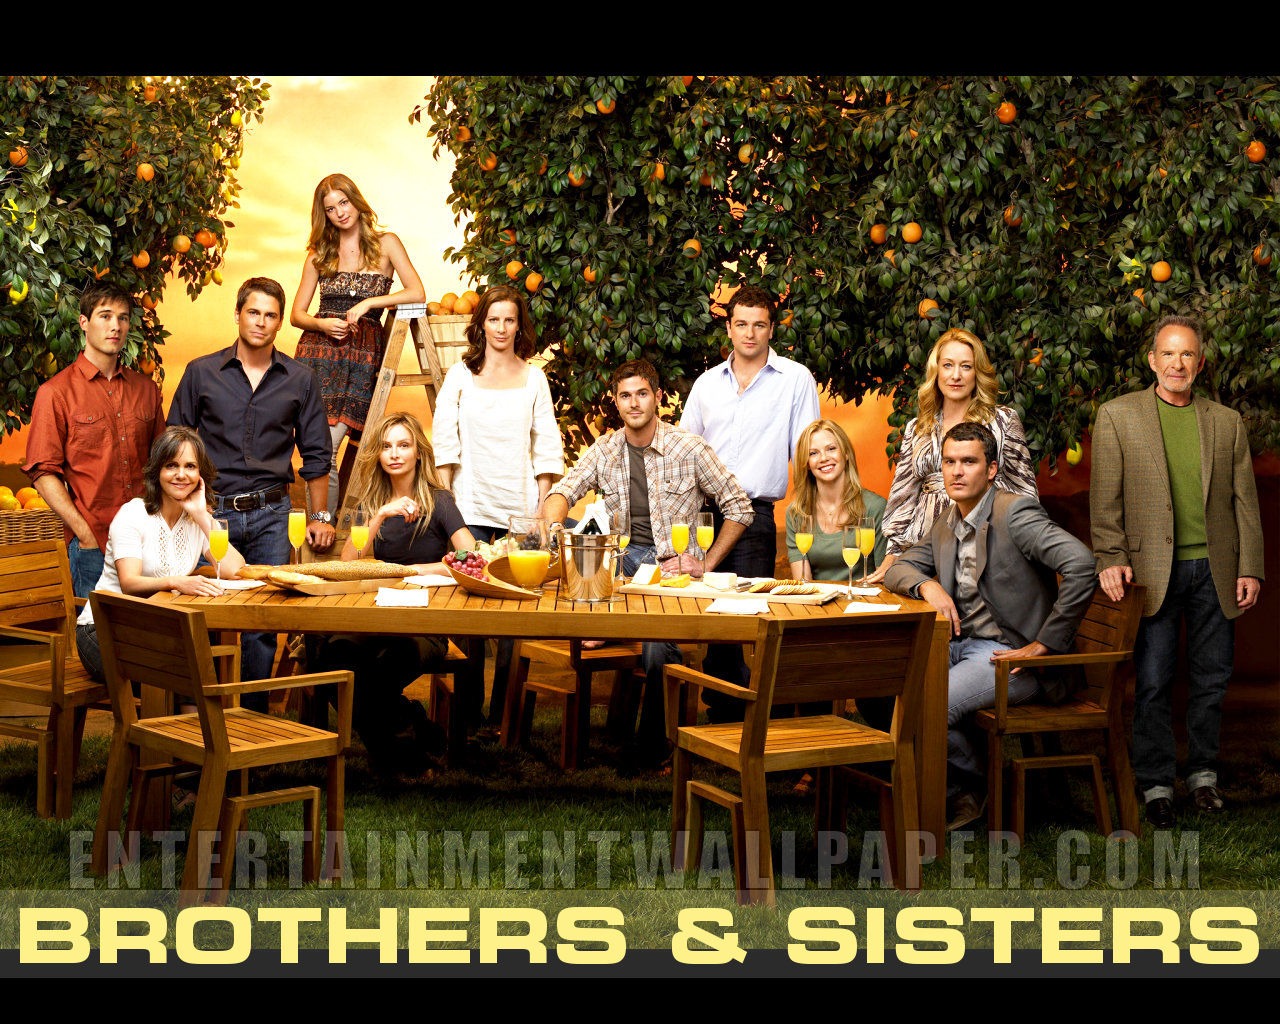 Brothers & Sisters 兄弟姐妹28 - 1280x1024